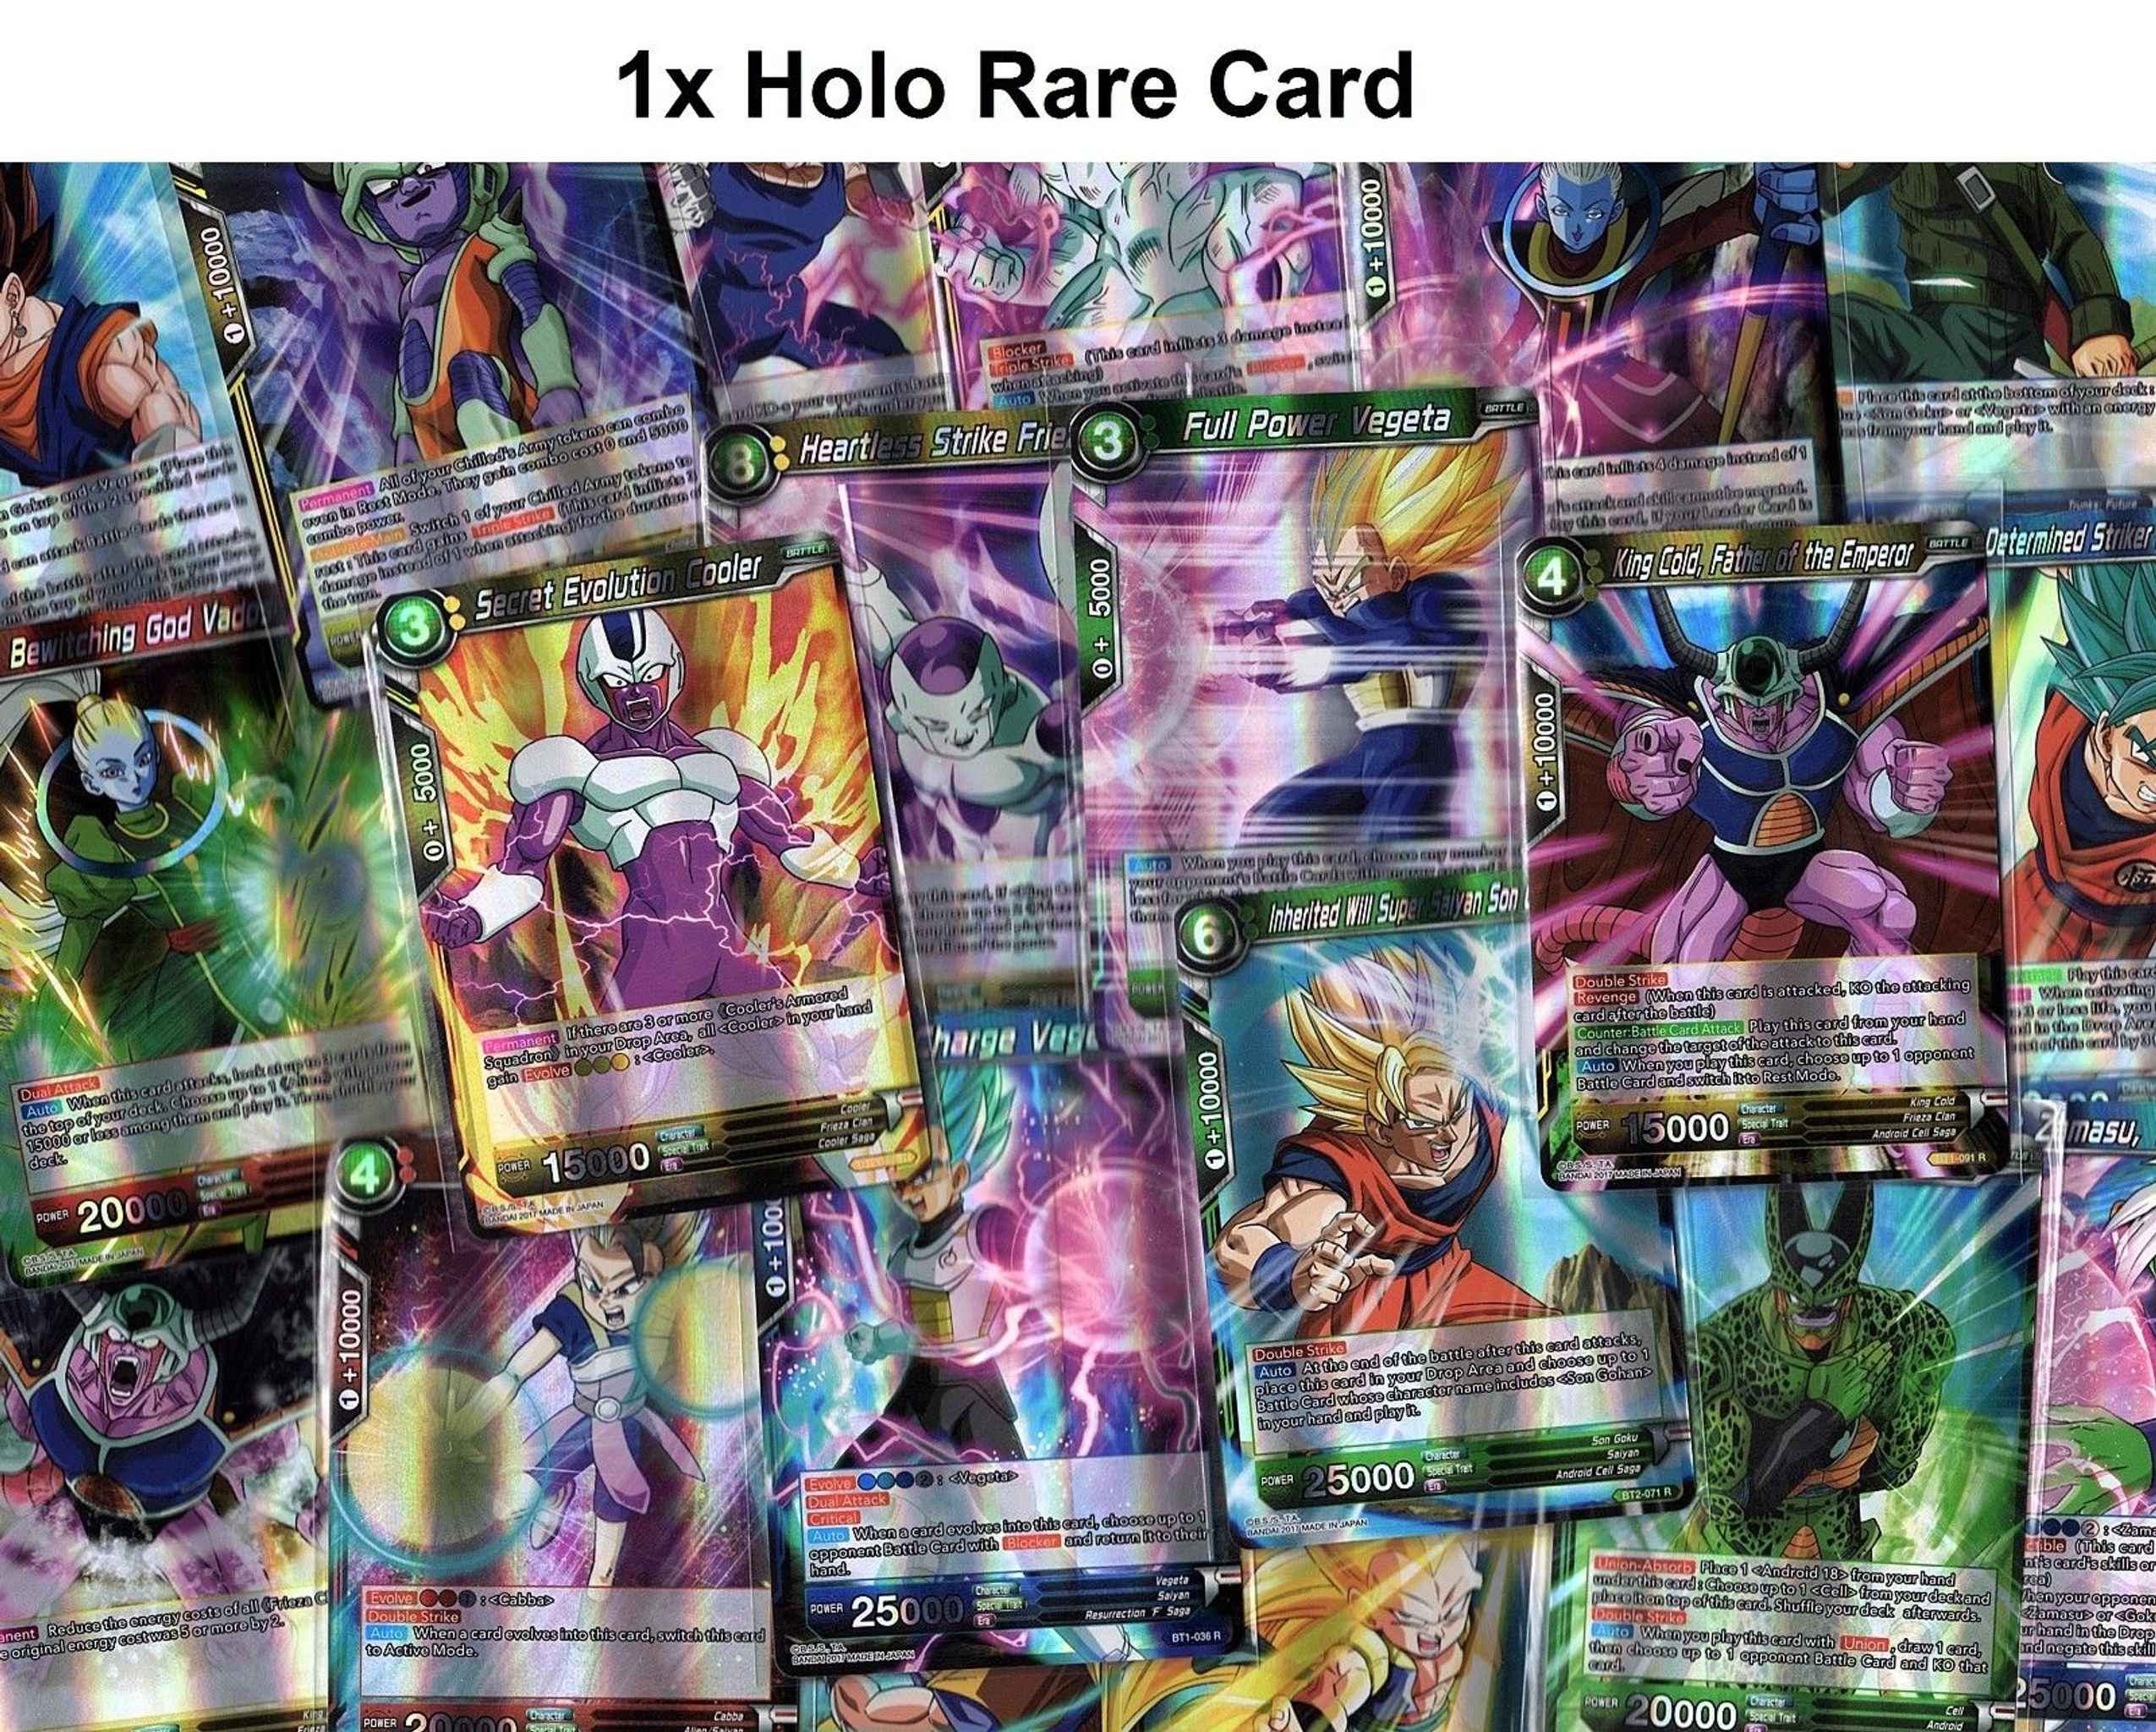 Random From Every Series 100 Dragon Ball Super TCG Cards Lot with 1 Rare Holo 